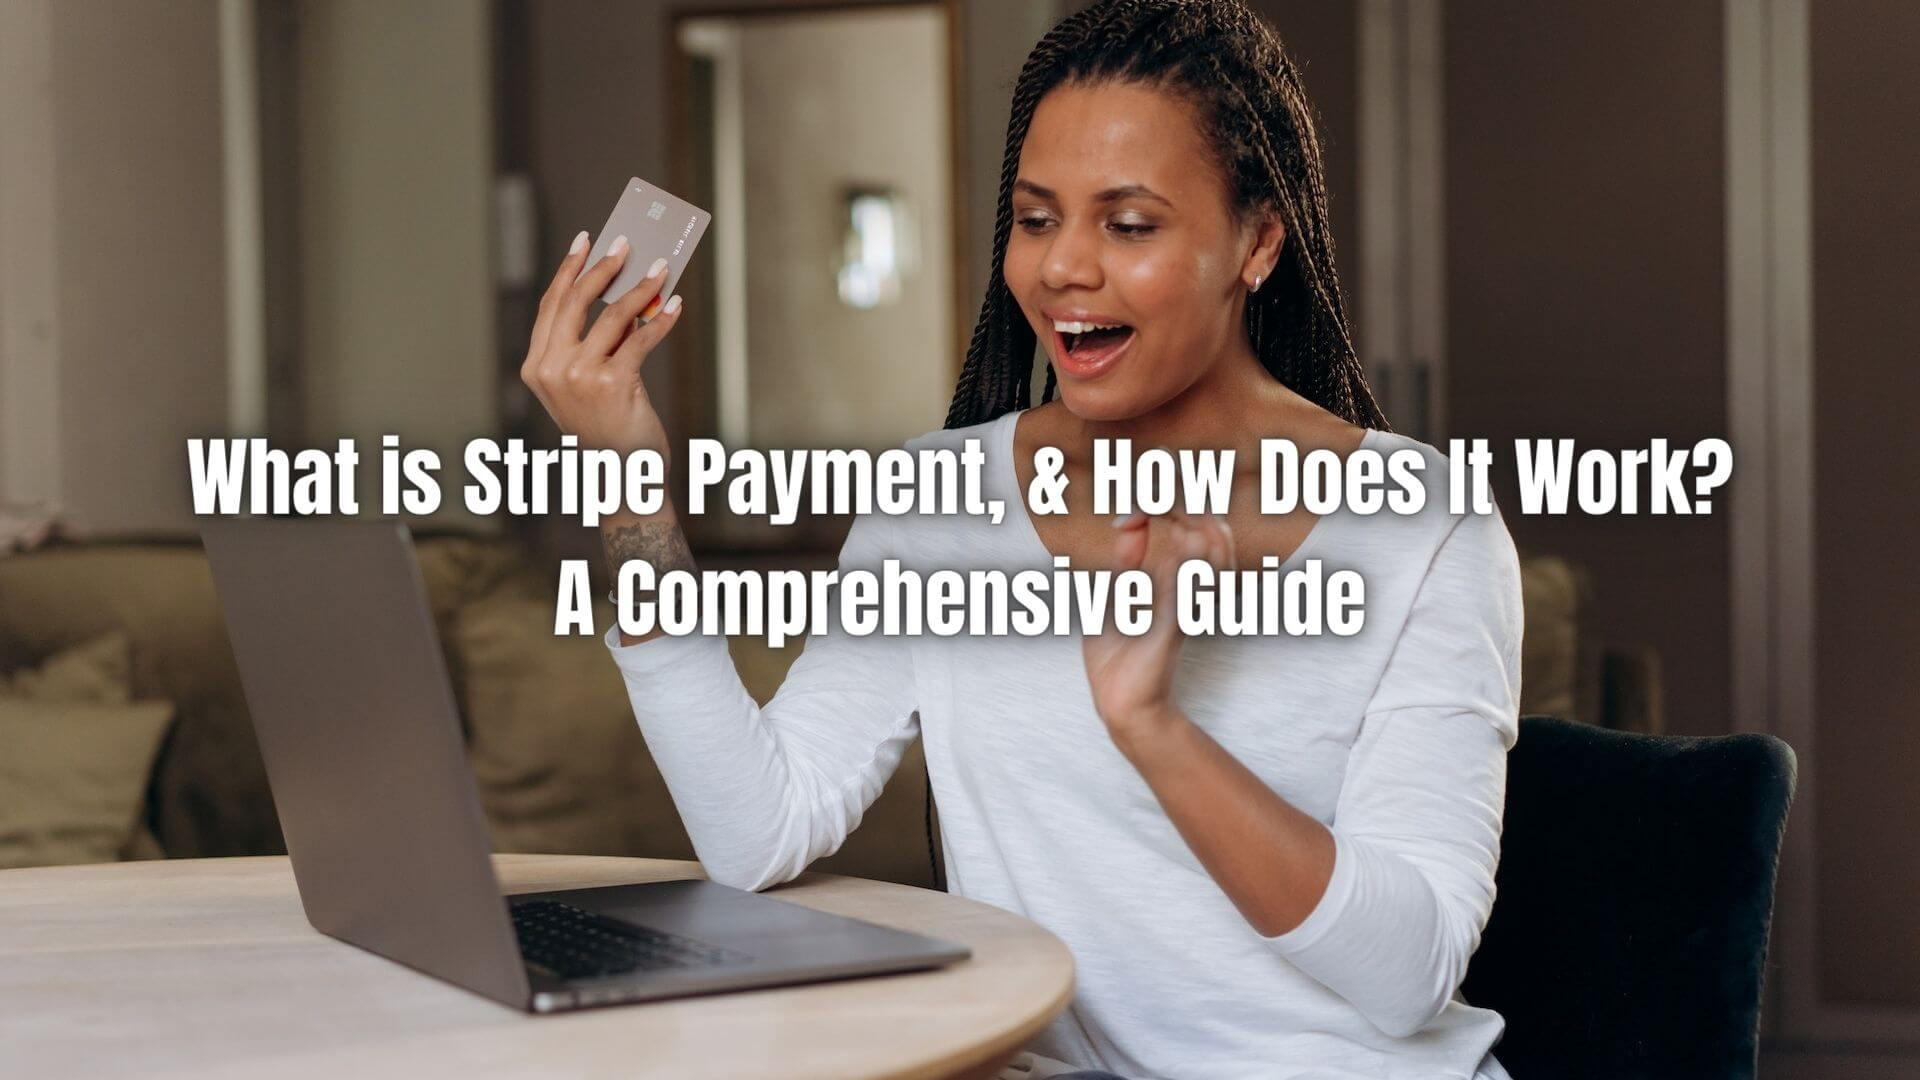 Do you want an easy and secure way to take payments online? Stripe Payments is the answer! Here's what Stripe Payment is and how it works!